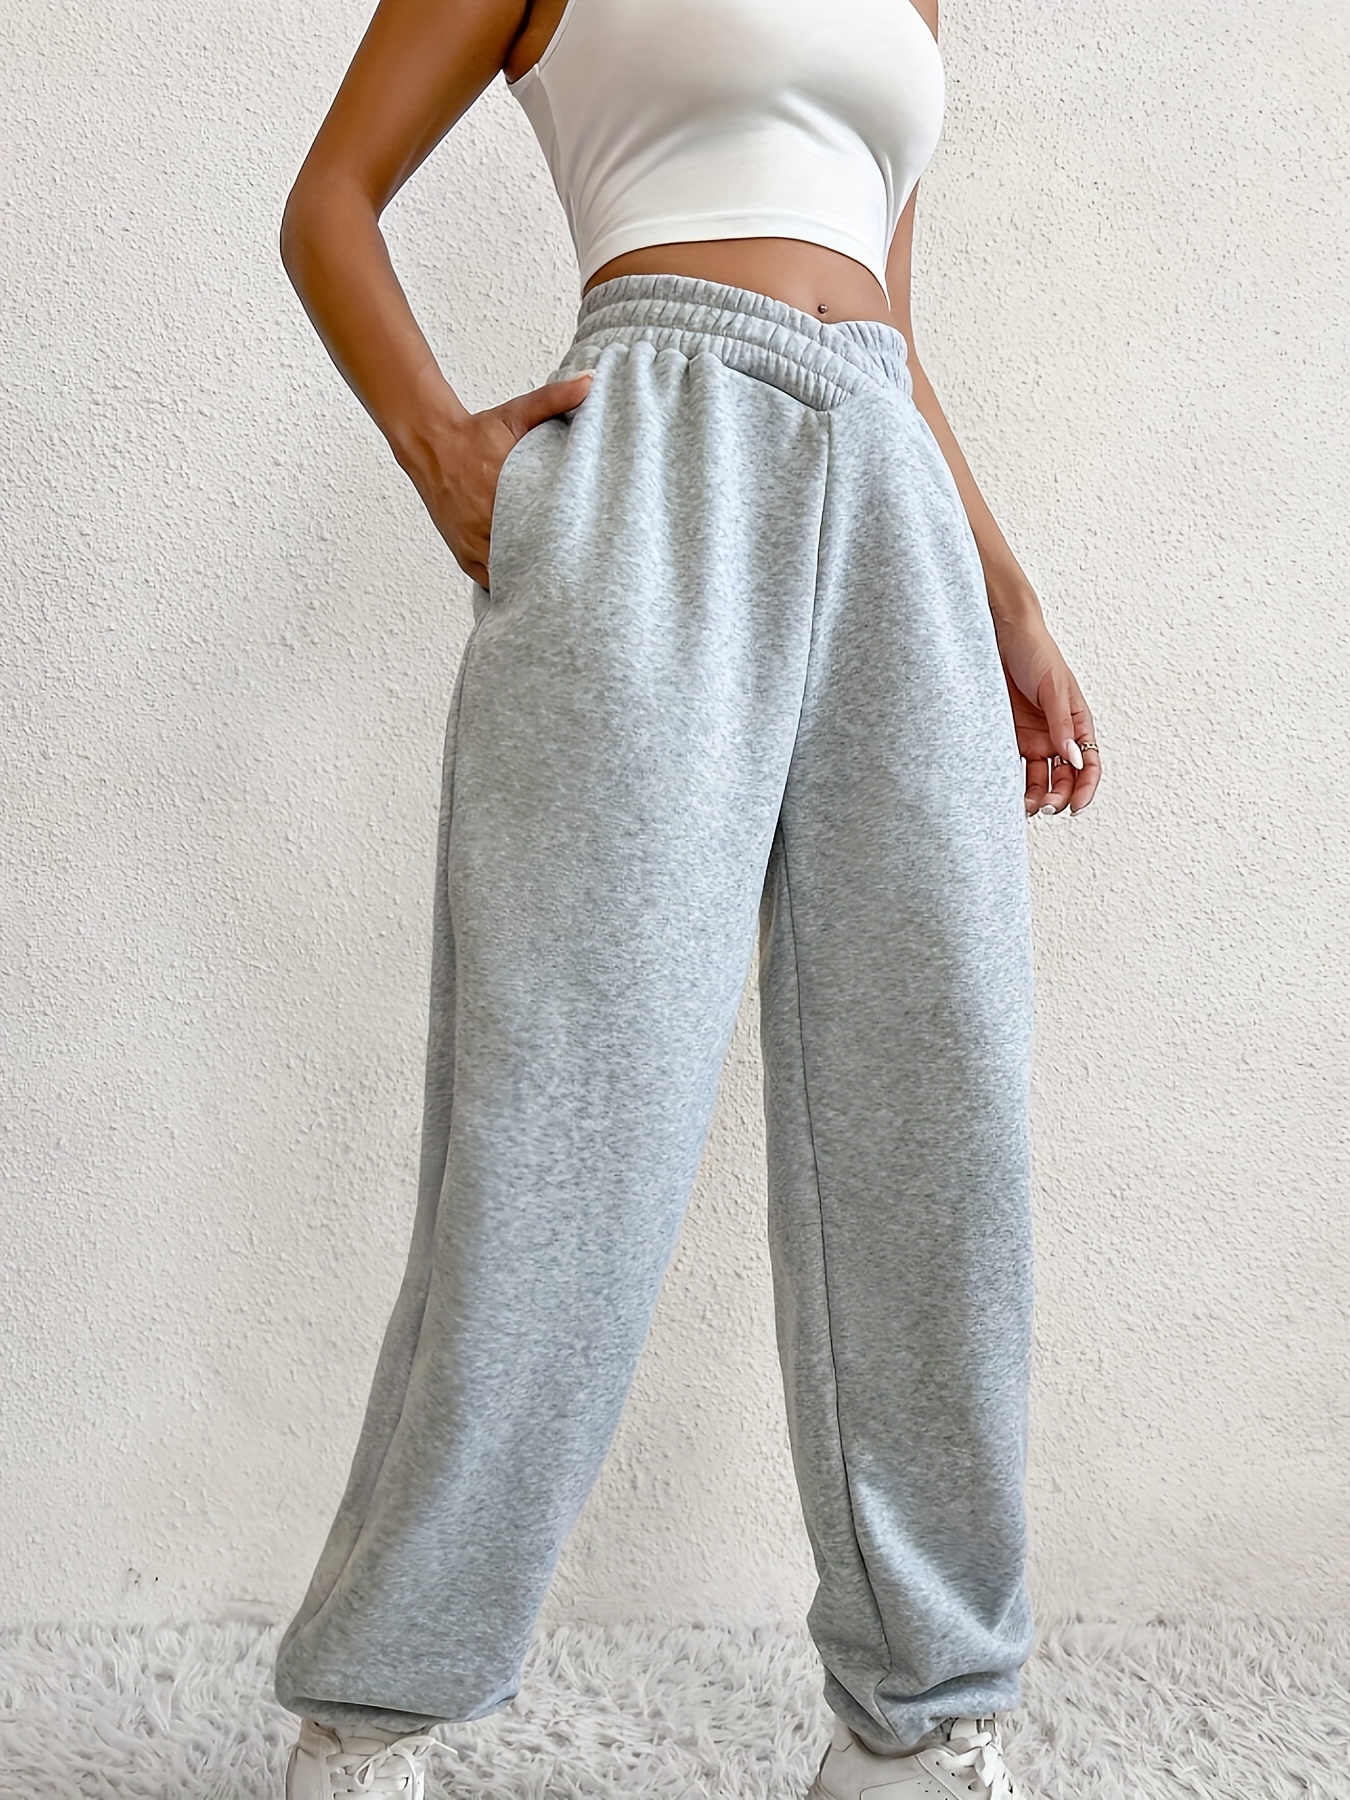 TIMIFIS Women's Casual Loose Wide Leg Cozy Pants Yoga Sweatpants Comfy High  Waisted Sports Athletic Lounge Pants-Gray-S - Fall Savings Clearance 